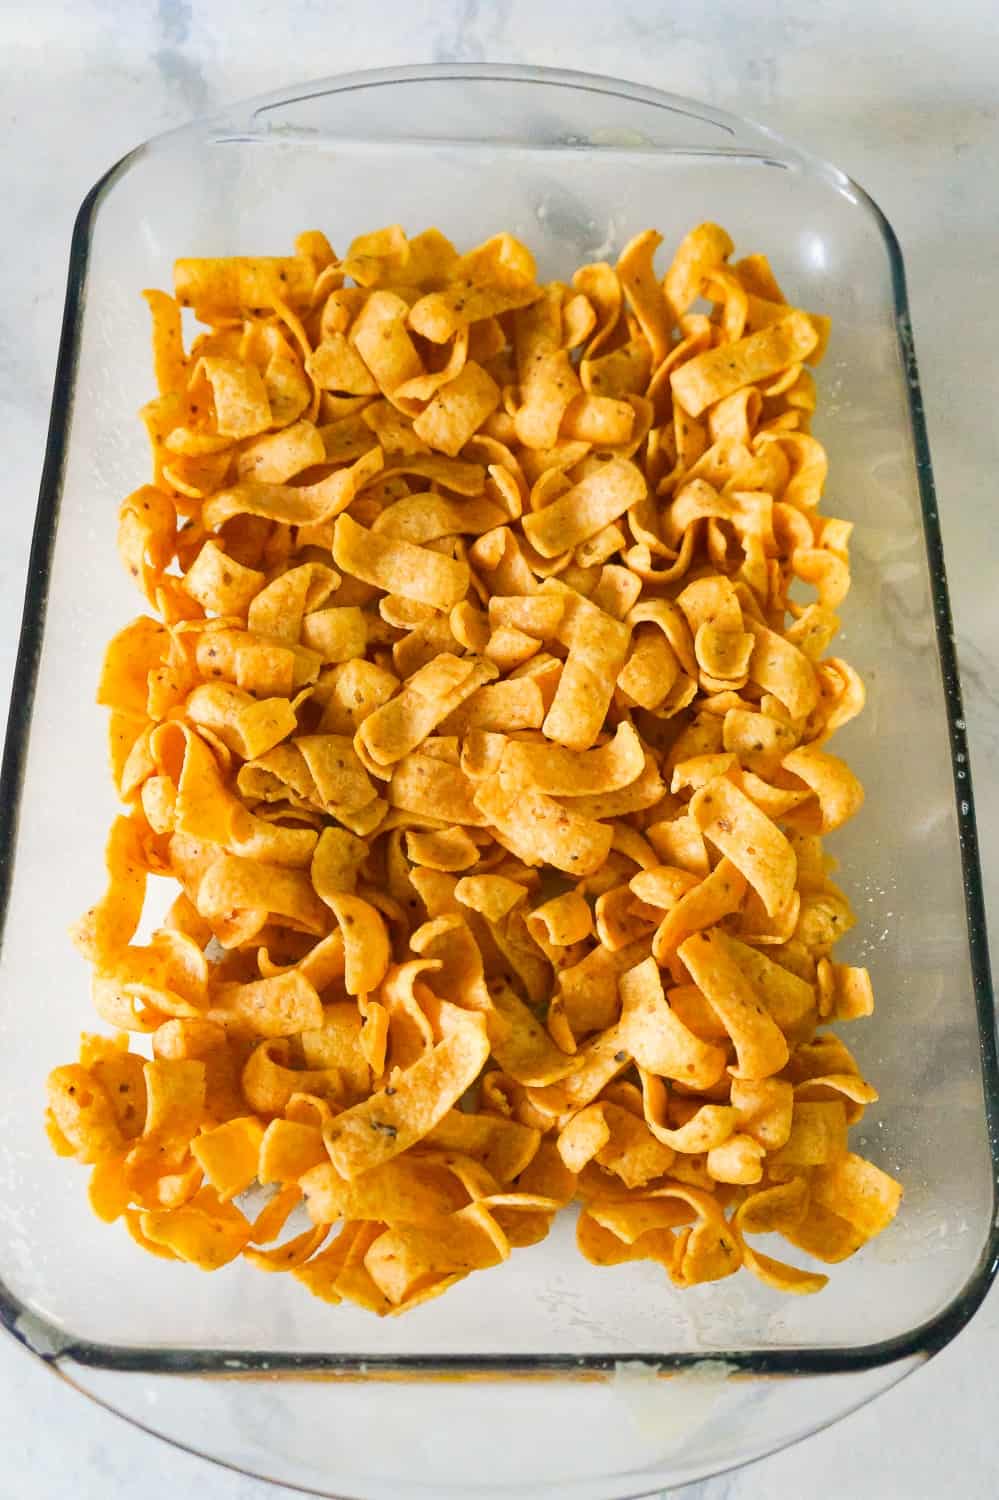 Frito's corn chips in a baking dish